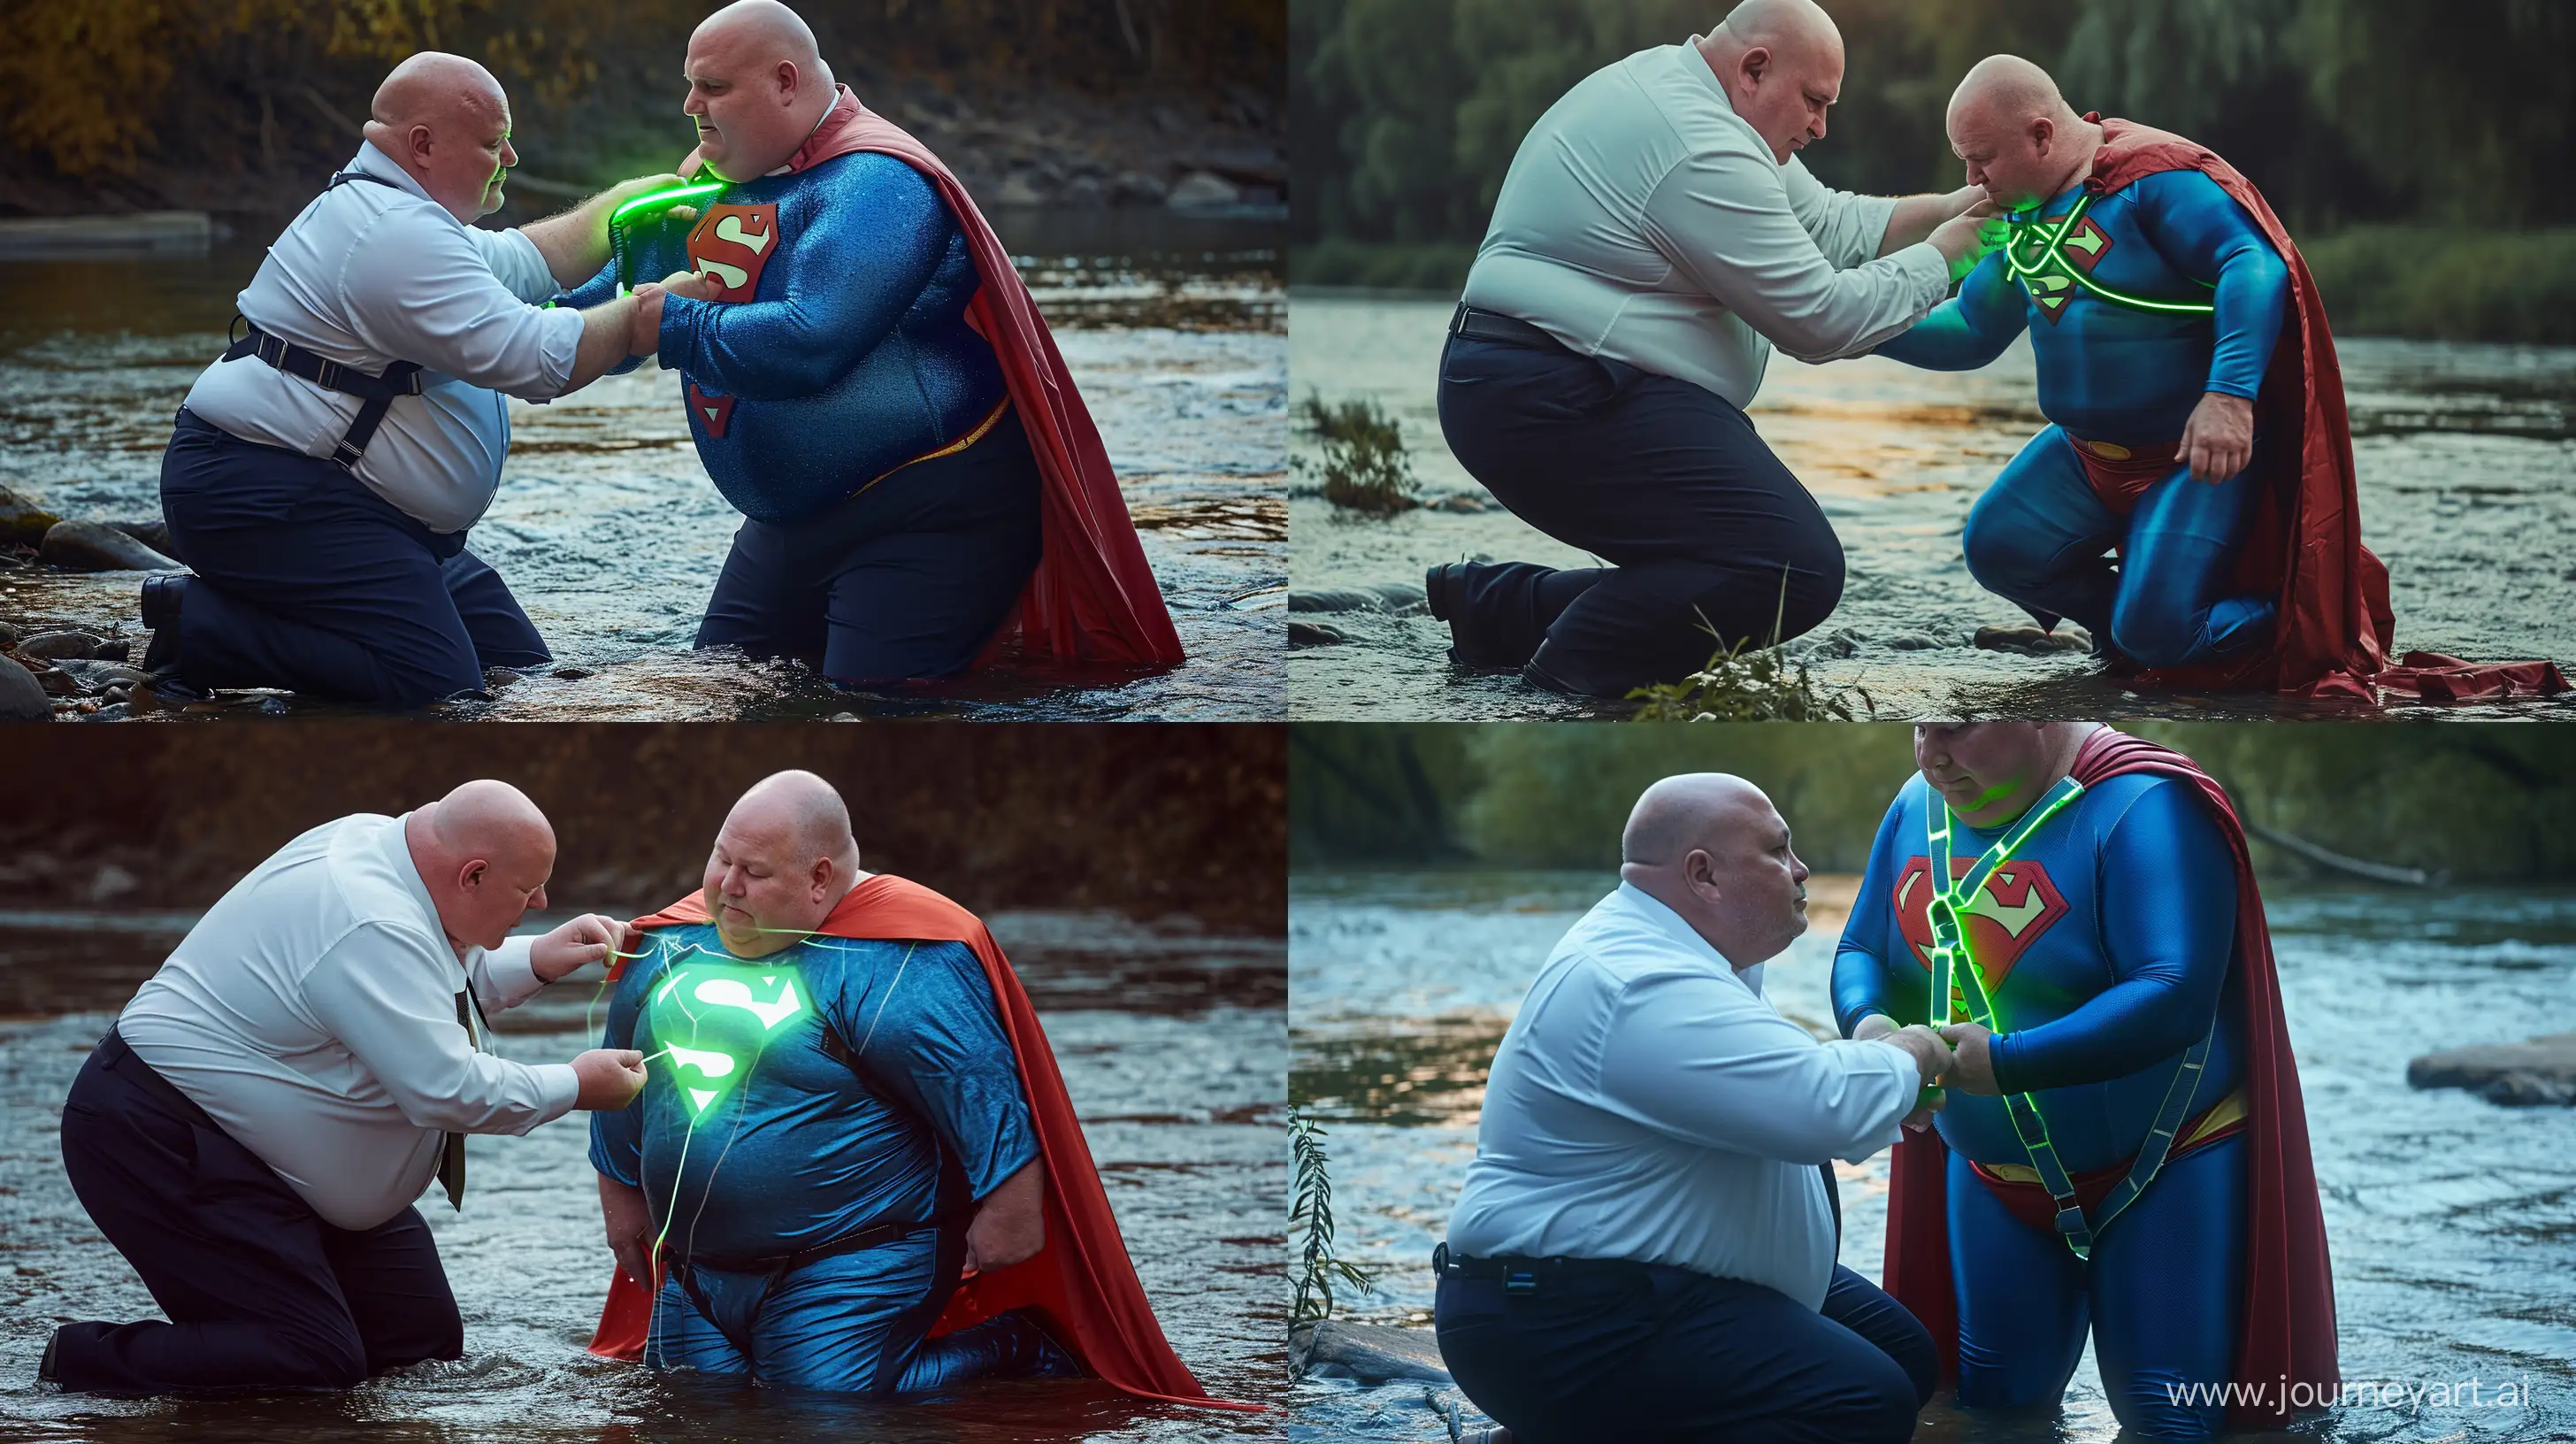 Close-up photo of a chubby man aged 60 wearing navy business pants and a white shirt, kneeling and tightening a green glowing harness on the chest of another chubby man aged 60 kneeling in the water and wearing a tight blue silky superman costume with a large red cape. River Outside. Natural light. Bald. Clean Shaven. --style raw --ar 16:9 --v 6